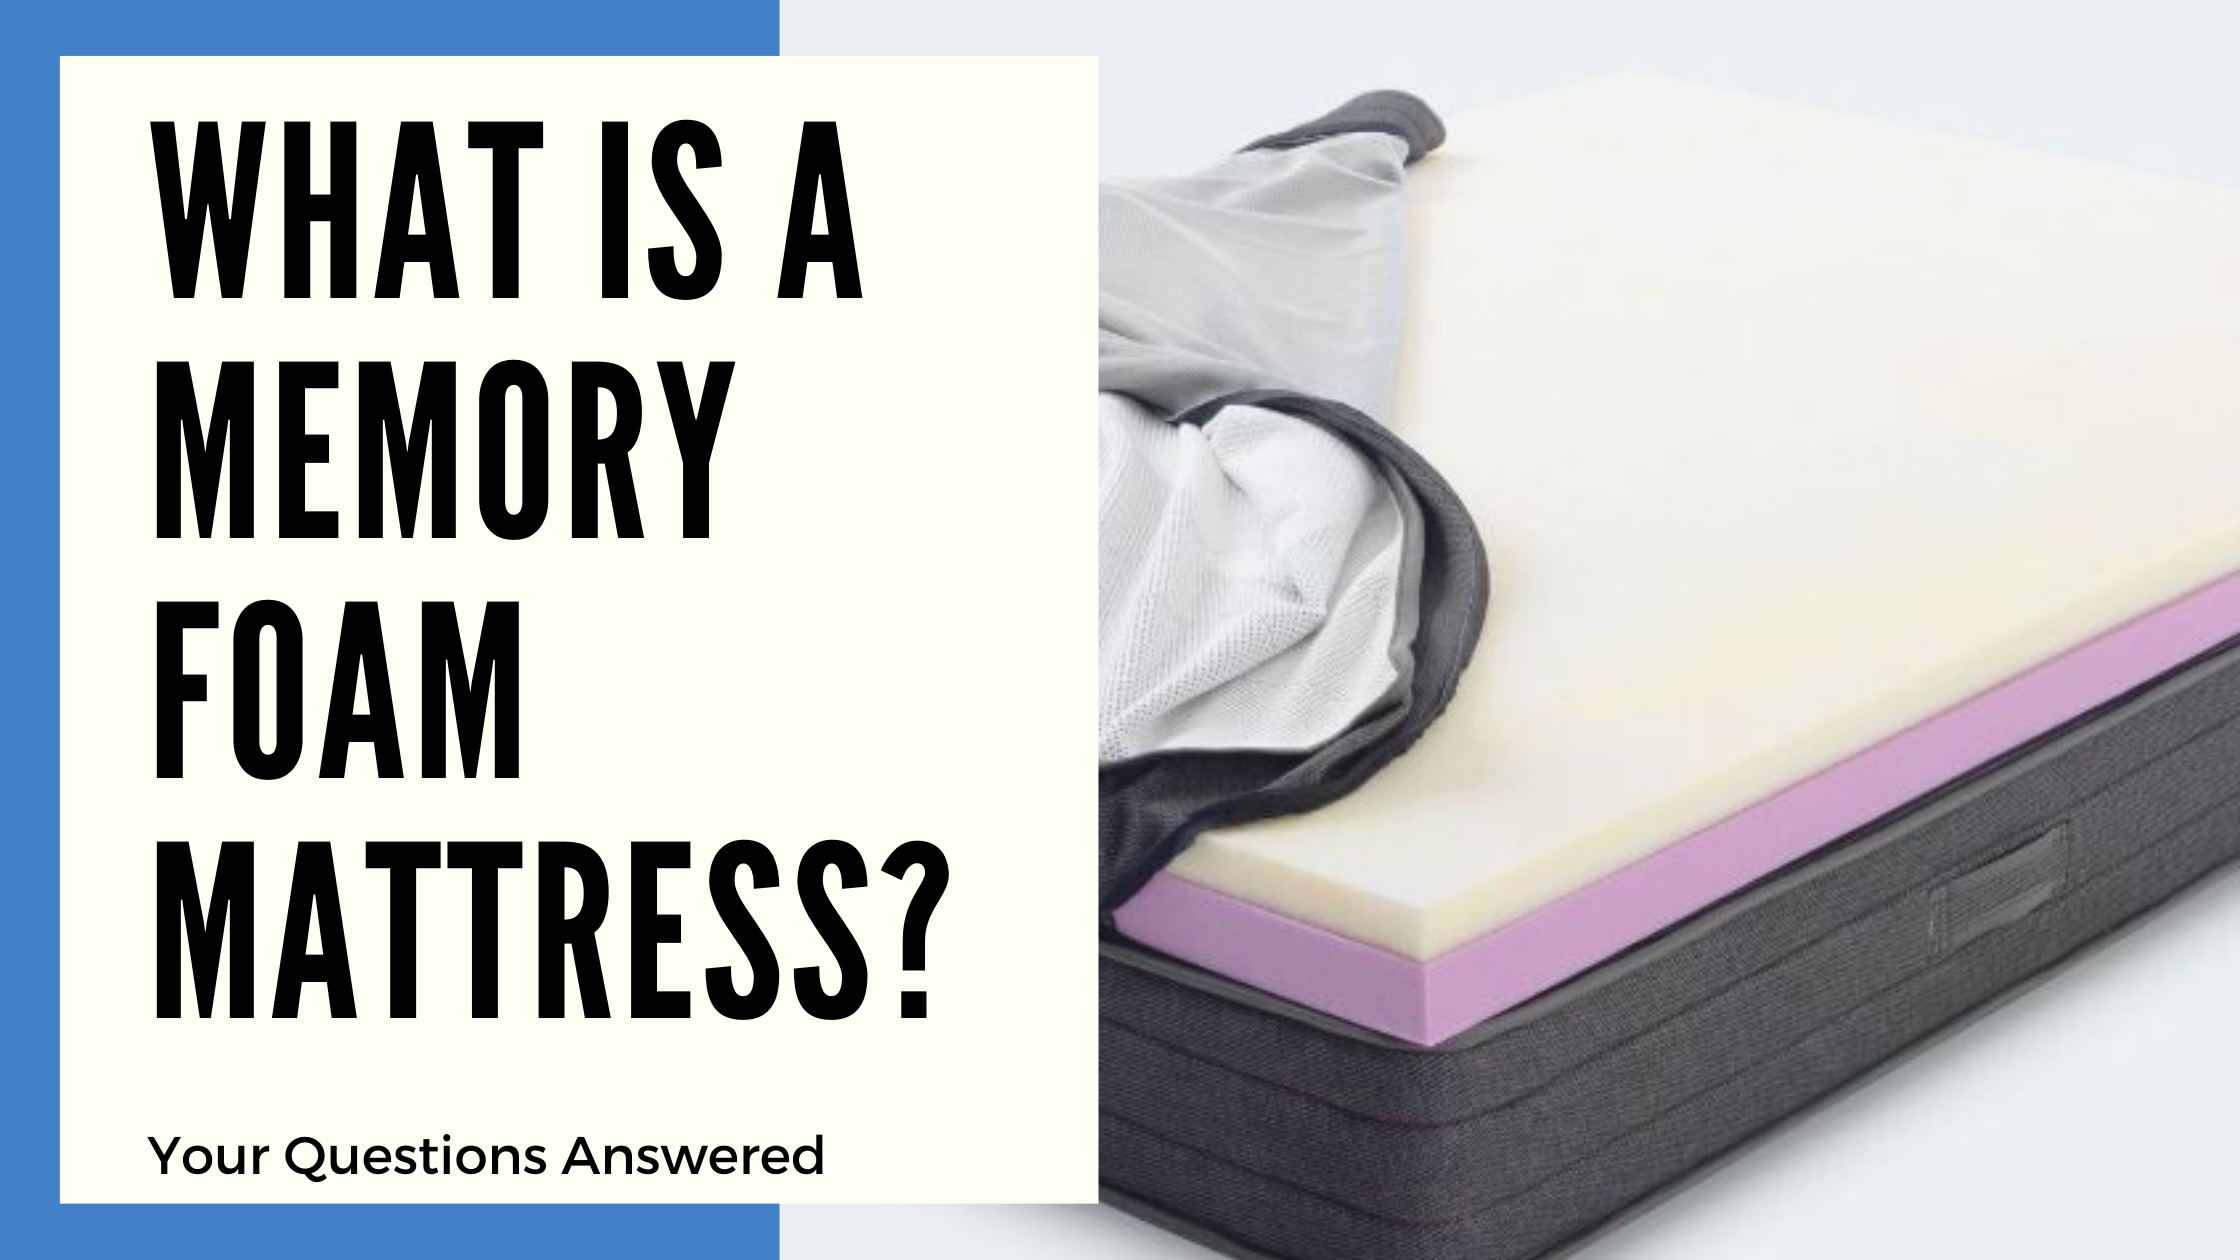 What Is A Memory foam Mattress - Cover Image